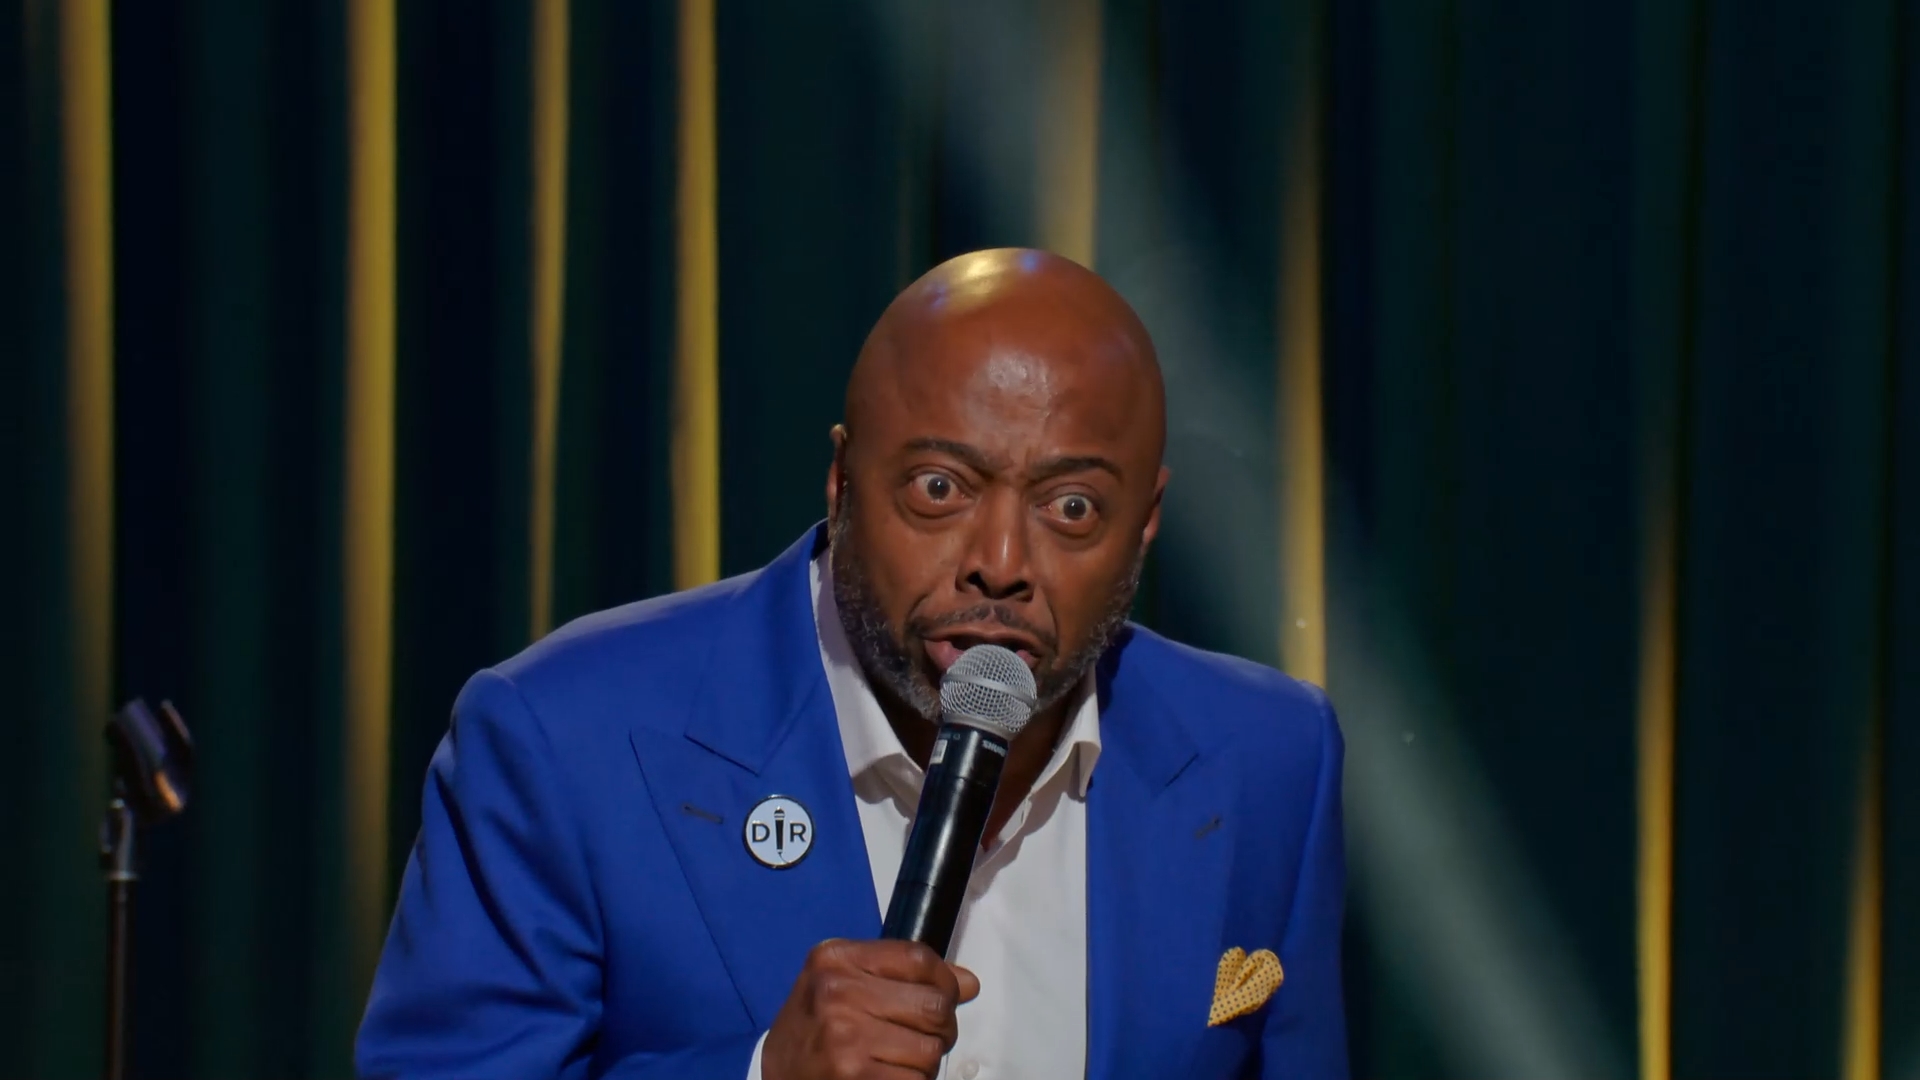 Chappelles Home Team - Donnell Rawlings: A New Day